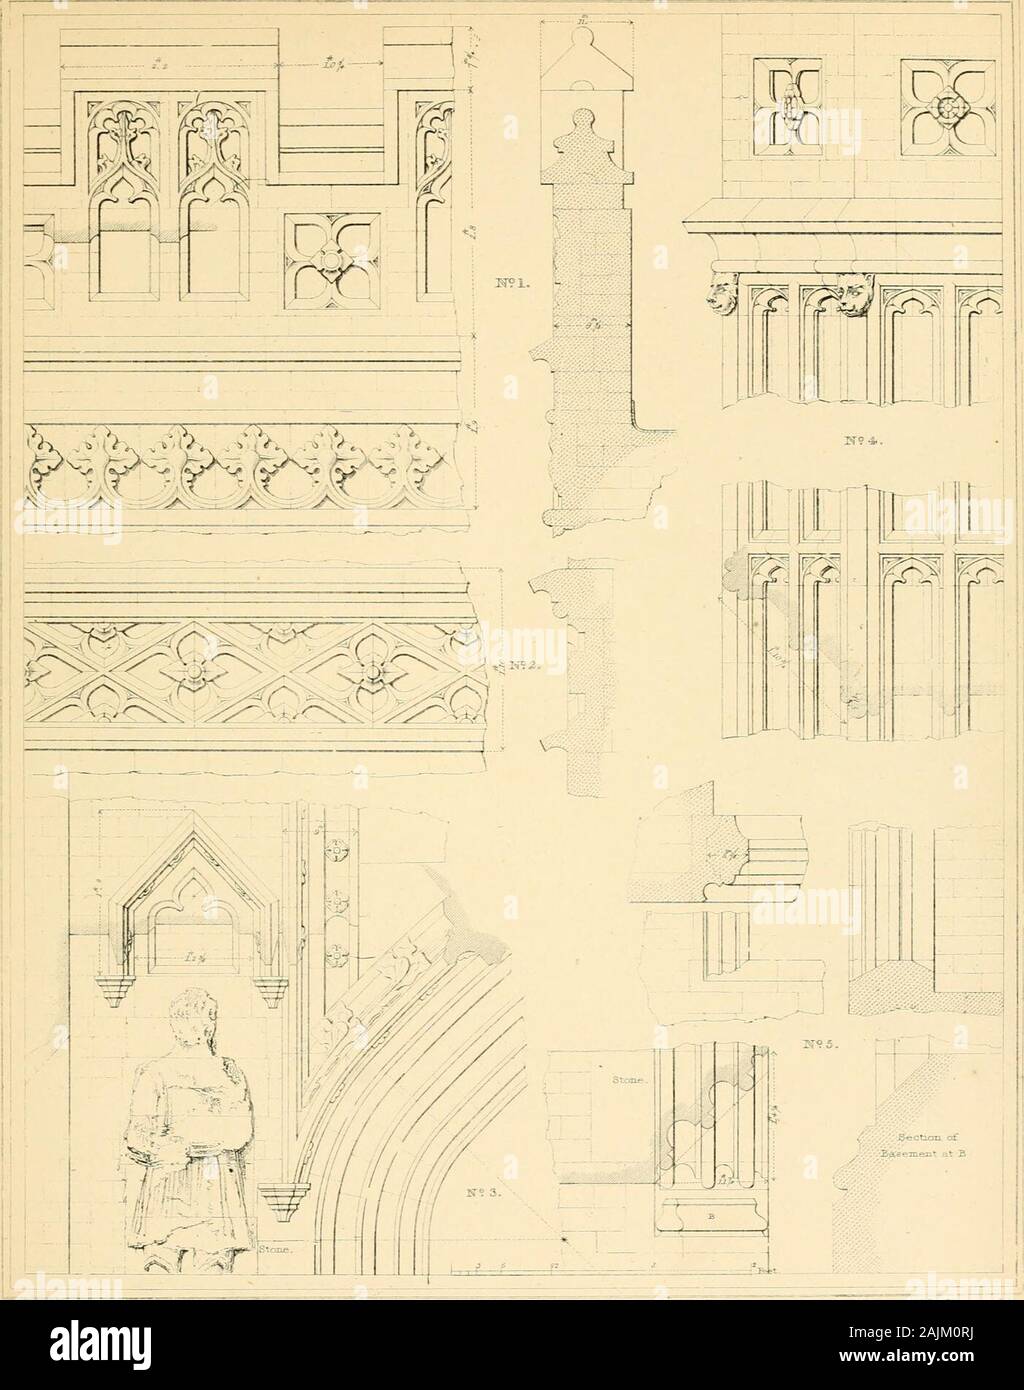 https://c8.alamy.com/comp/2AJM0RJ/examples-of-gothic-architecture-selected-from-various-ancient-edifices-in-england-consisting-of-plans-elevations-sections-and-parts-at-large-calculated-to-exemplify-the-various-styles-and-the-practical-construction-of-this-admired-class-of-architecture-accompanied-by-historical-and-descriptive-accounts-pleai-at-a31io-w3nj5-ccmice-plan-at-bshordn-sase-drawn-bybyerrey-jle-ket-schip-jv-turree-an-the-soiuh-frotii-jtfz-rn-c-offftc-turtets-an-ifu-xcrdh-frotiz-of-the-gaiehouse-dombsiic-architbctmie-ajehidin-arct-direx-dra-wm-by-bferrey-jle-eeuxi-eerulpsot3th-2AJM0RJ.jpg